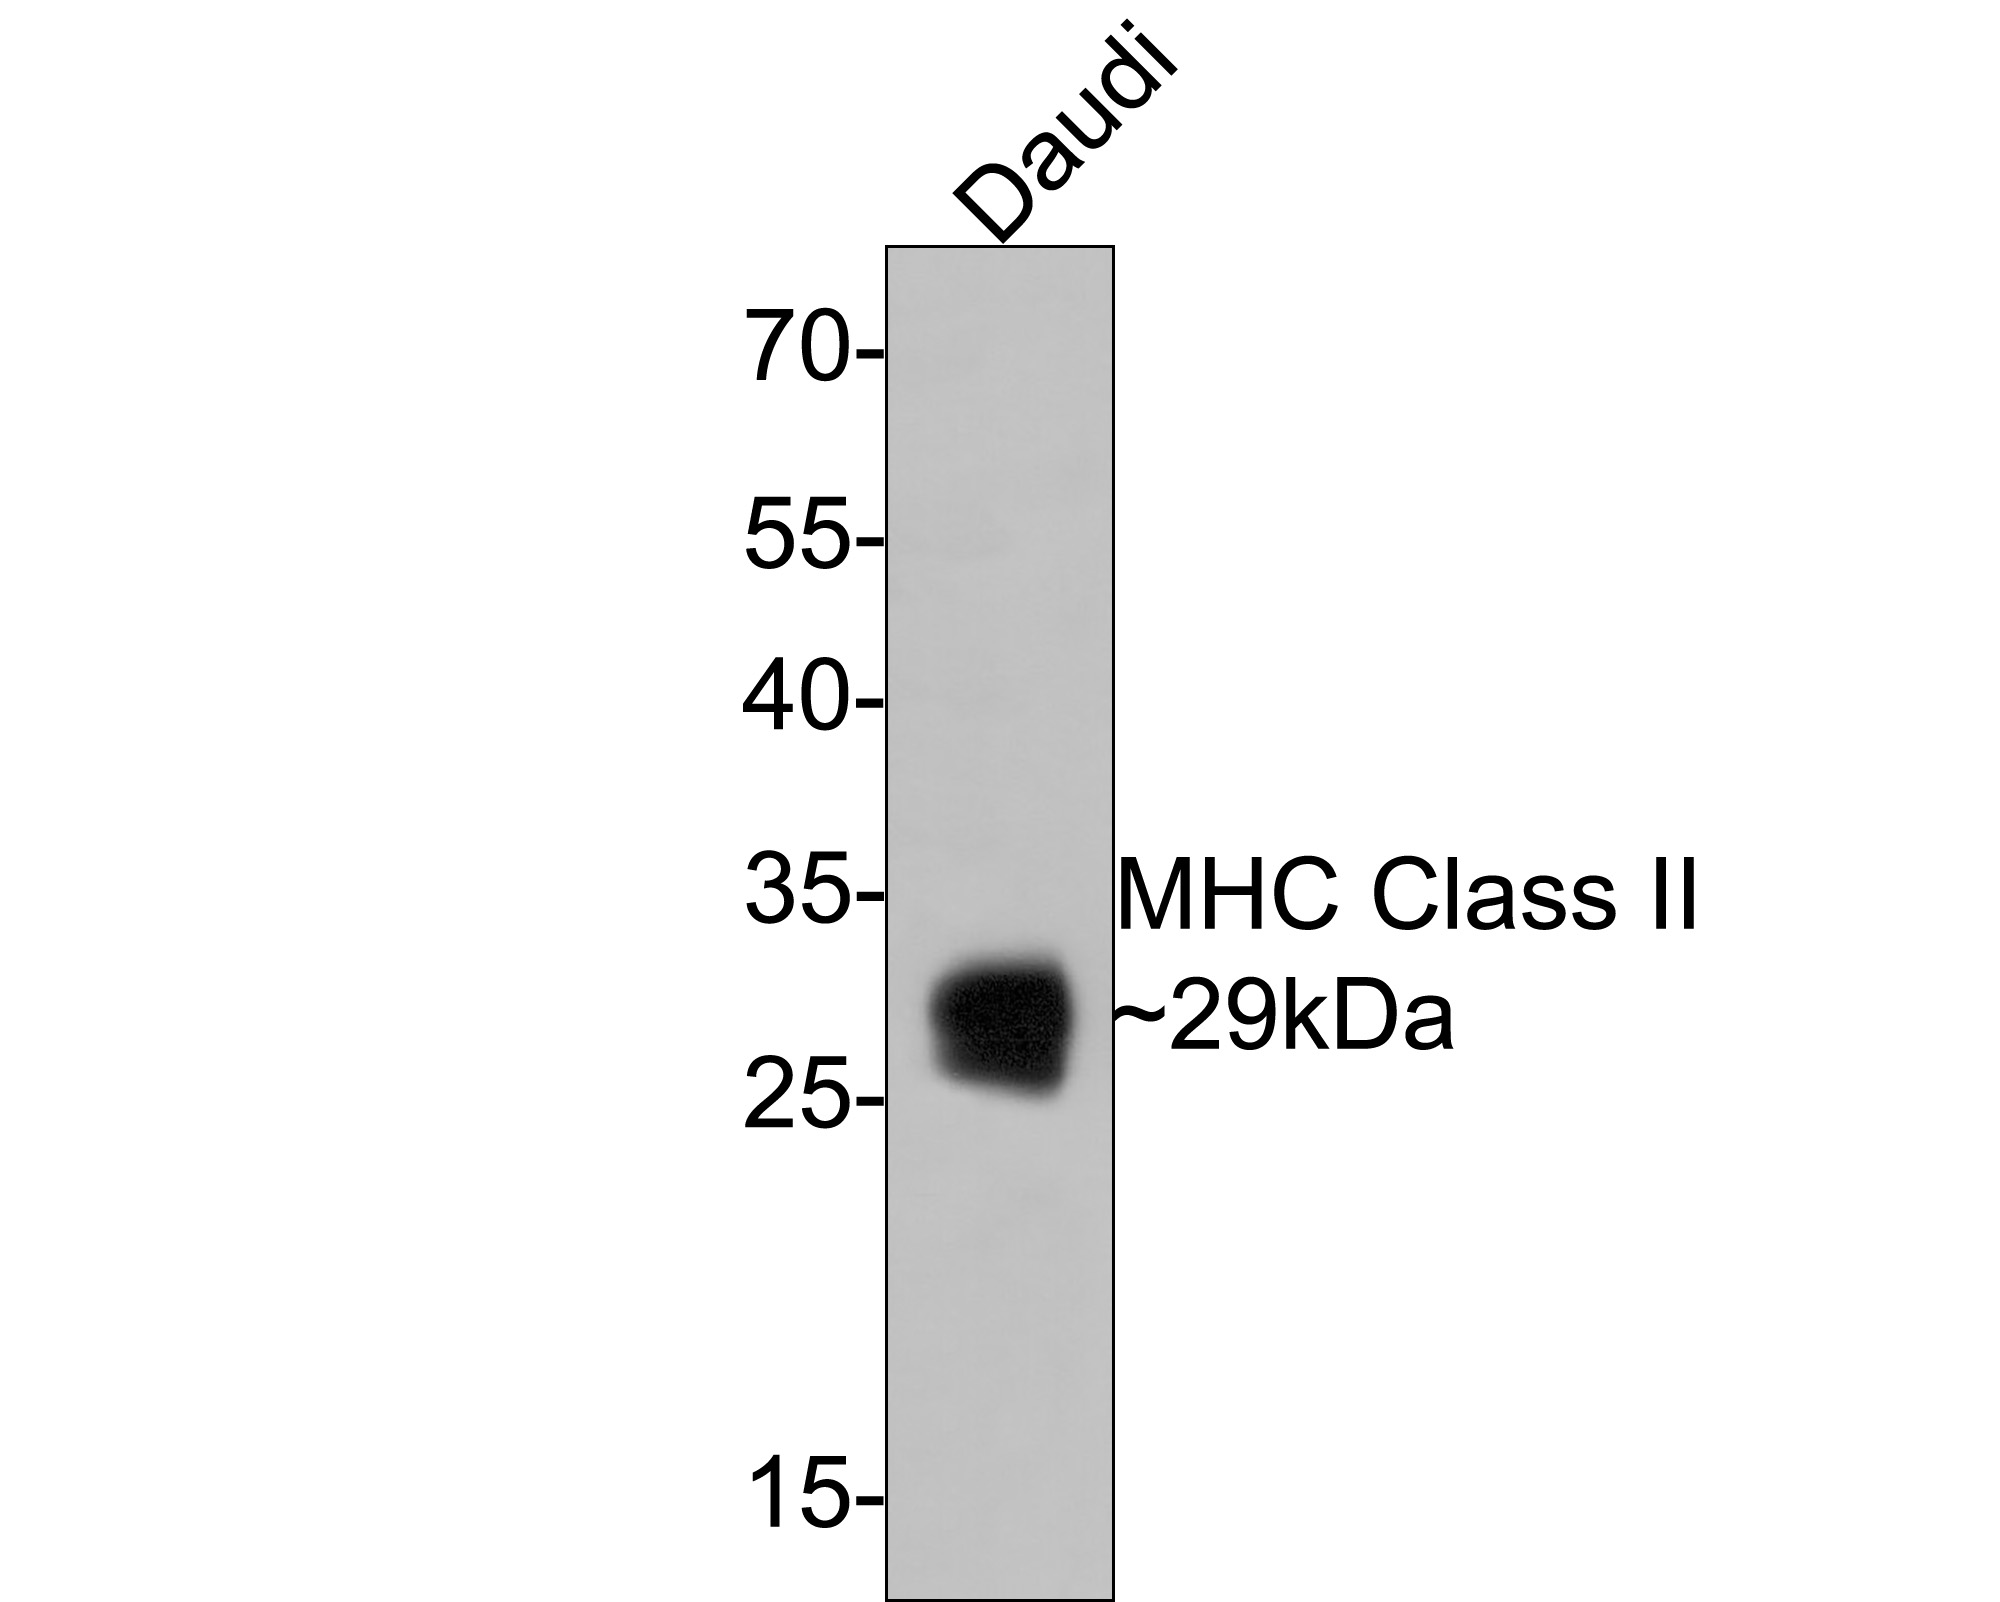 Western blot analysis of MHC Class II on Daudi cell lysates with Rabbit anti-MHC Class II antibody (ET1704-13) at 1/500 dilution.<br />
<br />
Lysates/proteins at 10 µg/Lane.<br />
<br />
Predicted band size: 29 kDa<br />
Observed band size: 29 kDa<br />
<br />
Exposure time: 1 minute;<br />
<br />
12% SDS-PAGE gel.<br />
<br />
Proteins were transferred to a PVDF membrane and blocked with 5% NFDM/TBST for 1 hour at room temperature. The primary antibody (ET1704-13) at 1/500 dilution was used in 5% NFDM/TBST at room temperature for 2 hours. Goat Anti-Rabbit IgG - HRP Secondary Antibody (HA1001) at 1:300,000 dilution was used for 1 hour at room temperature.